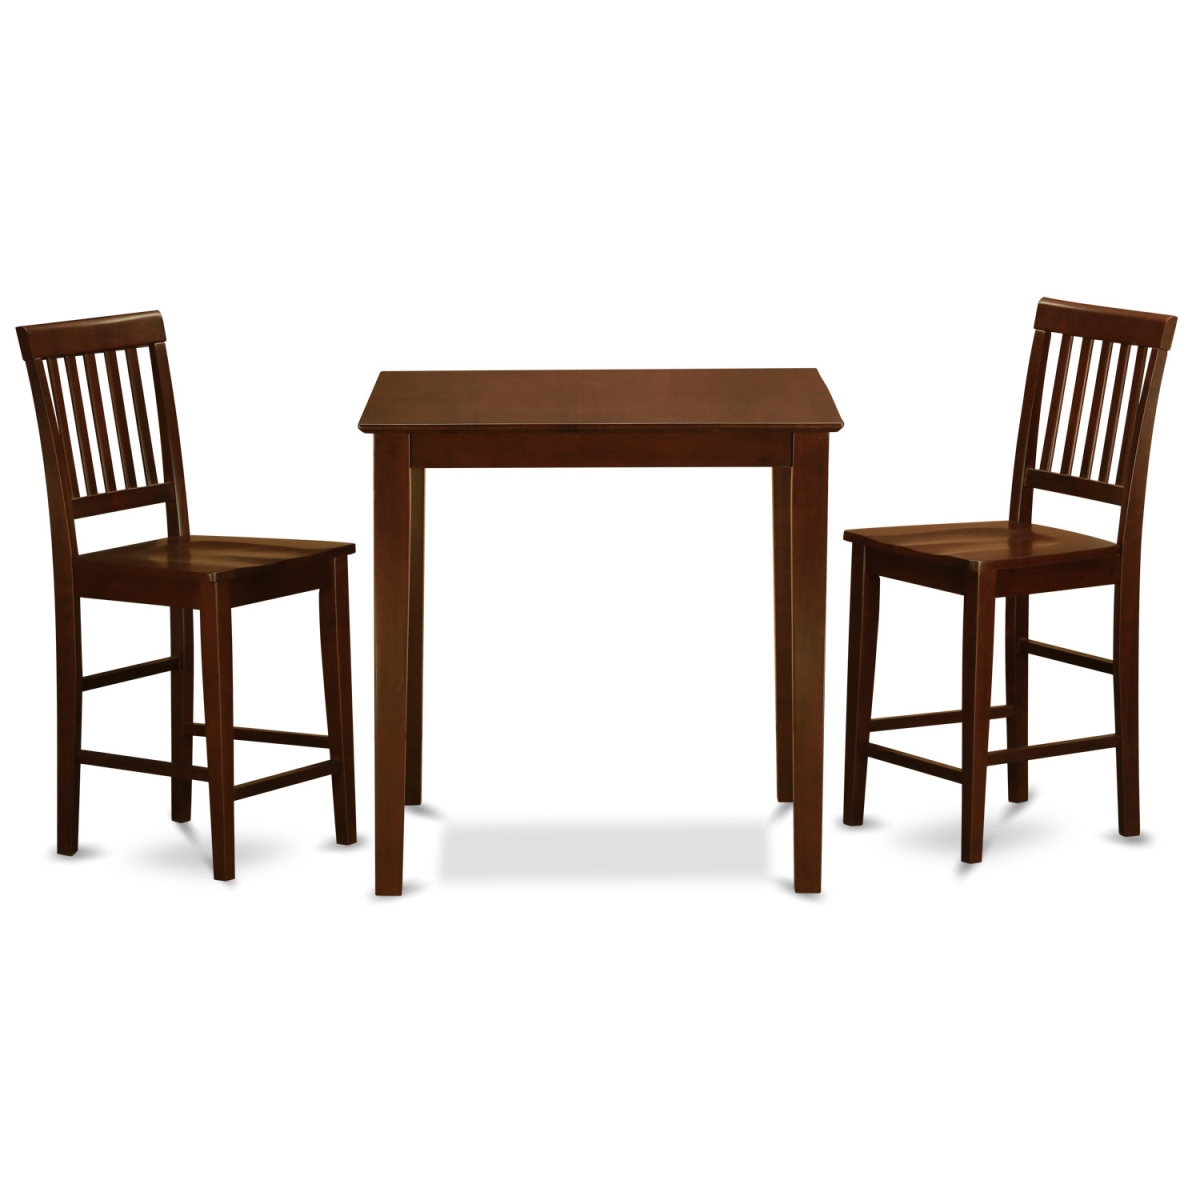 Counter Height Pub Table & 2 Kitchen Chairs, Mahogany